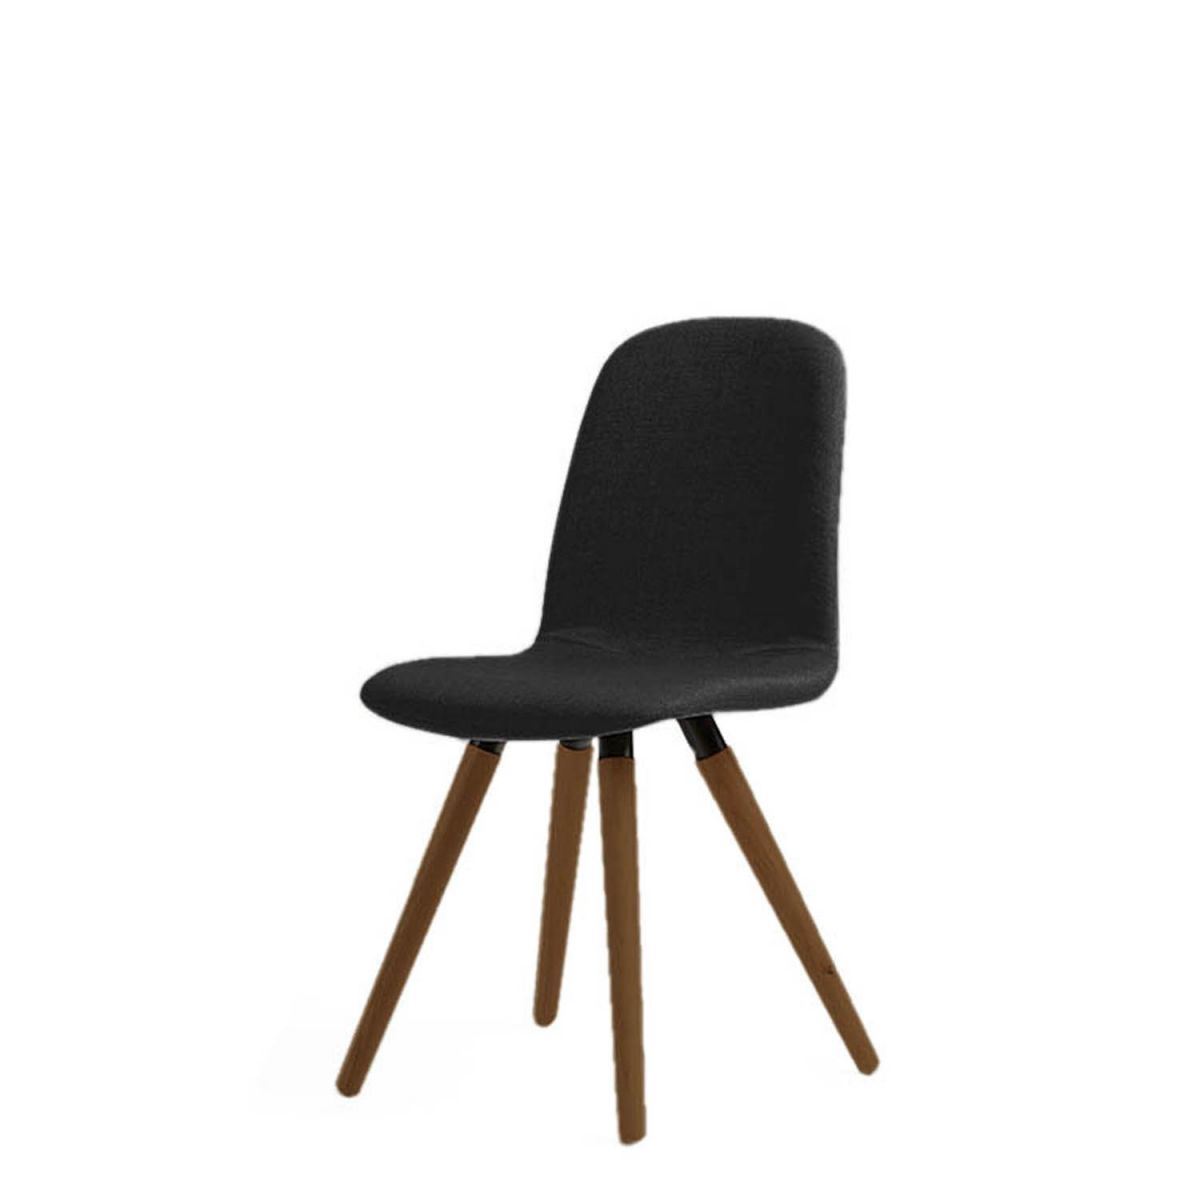 Stick Dining Chair Inspiration Furniture Vancouver Bc